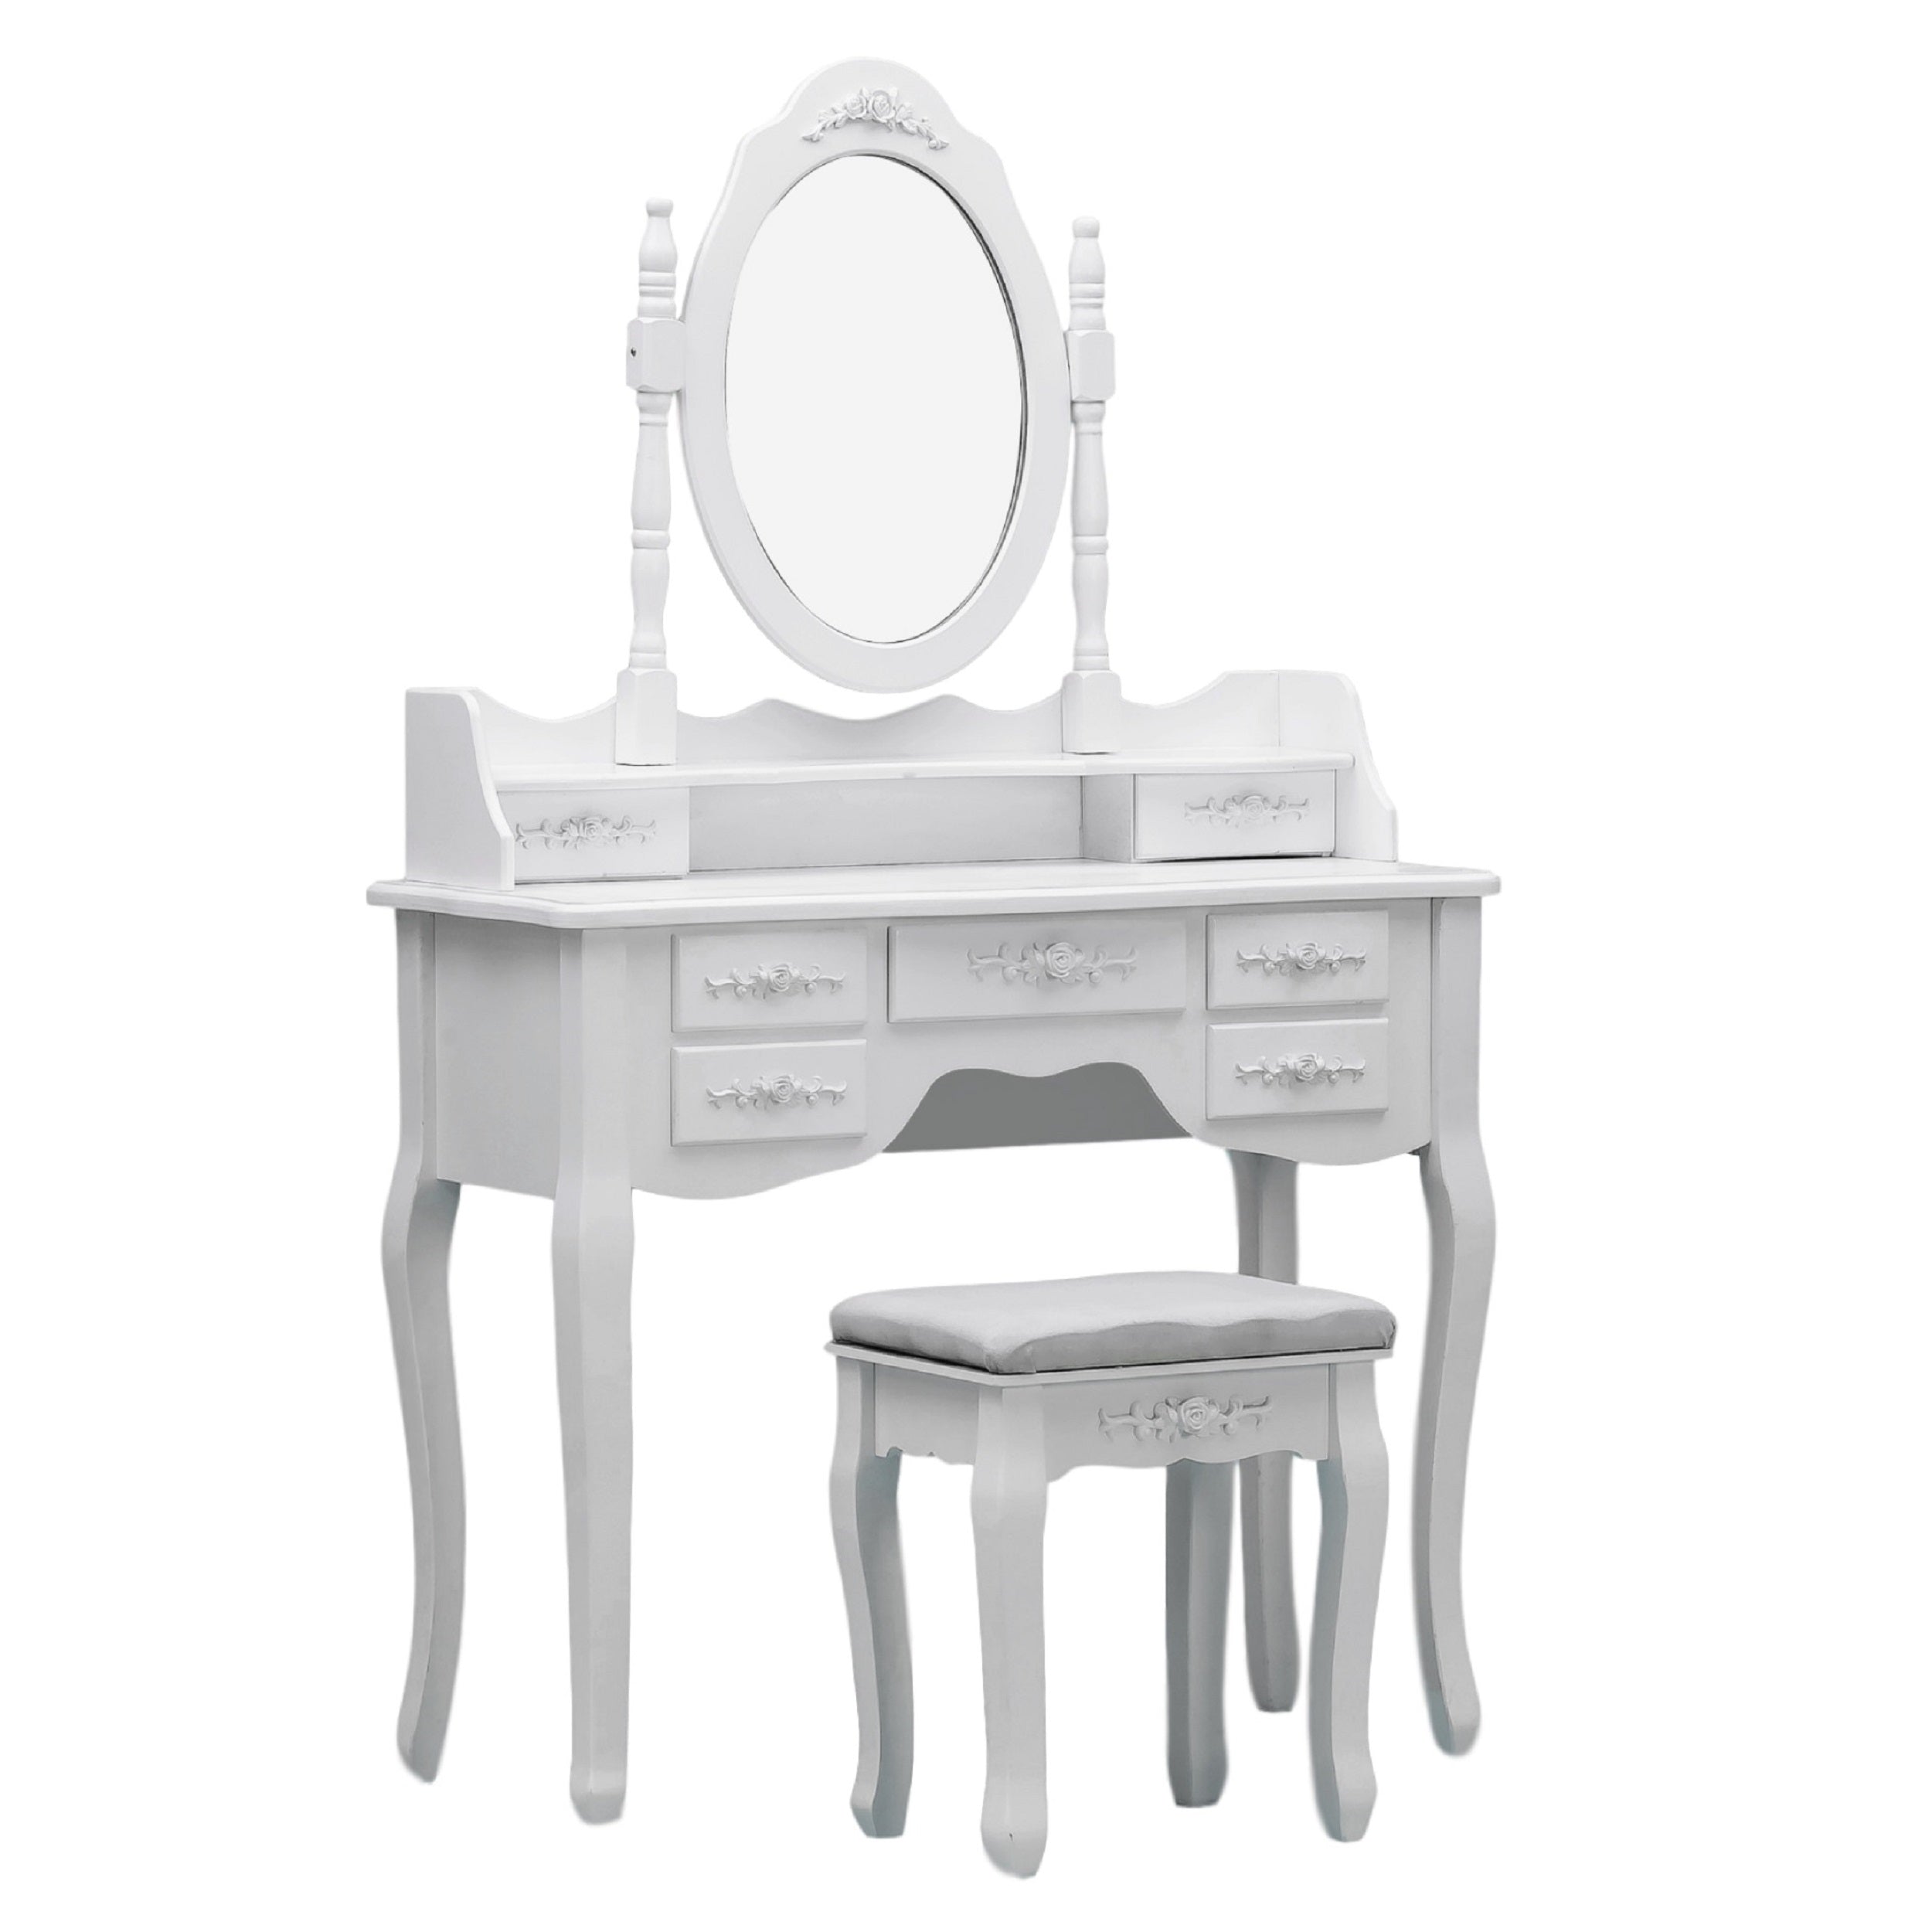 ViscoLogic Wooden Mirrored Makeup Vanity Table & Cushioned Stool Set - White